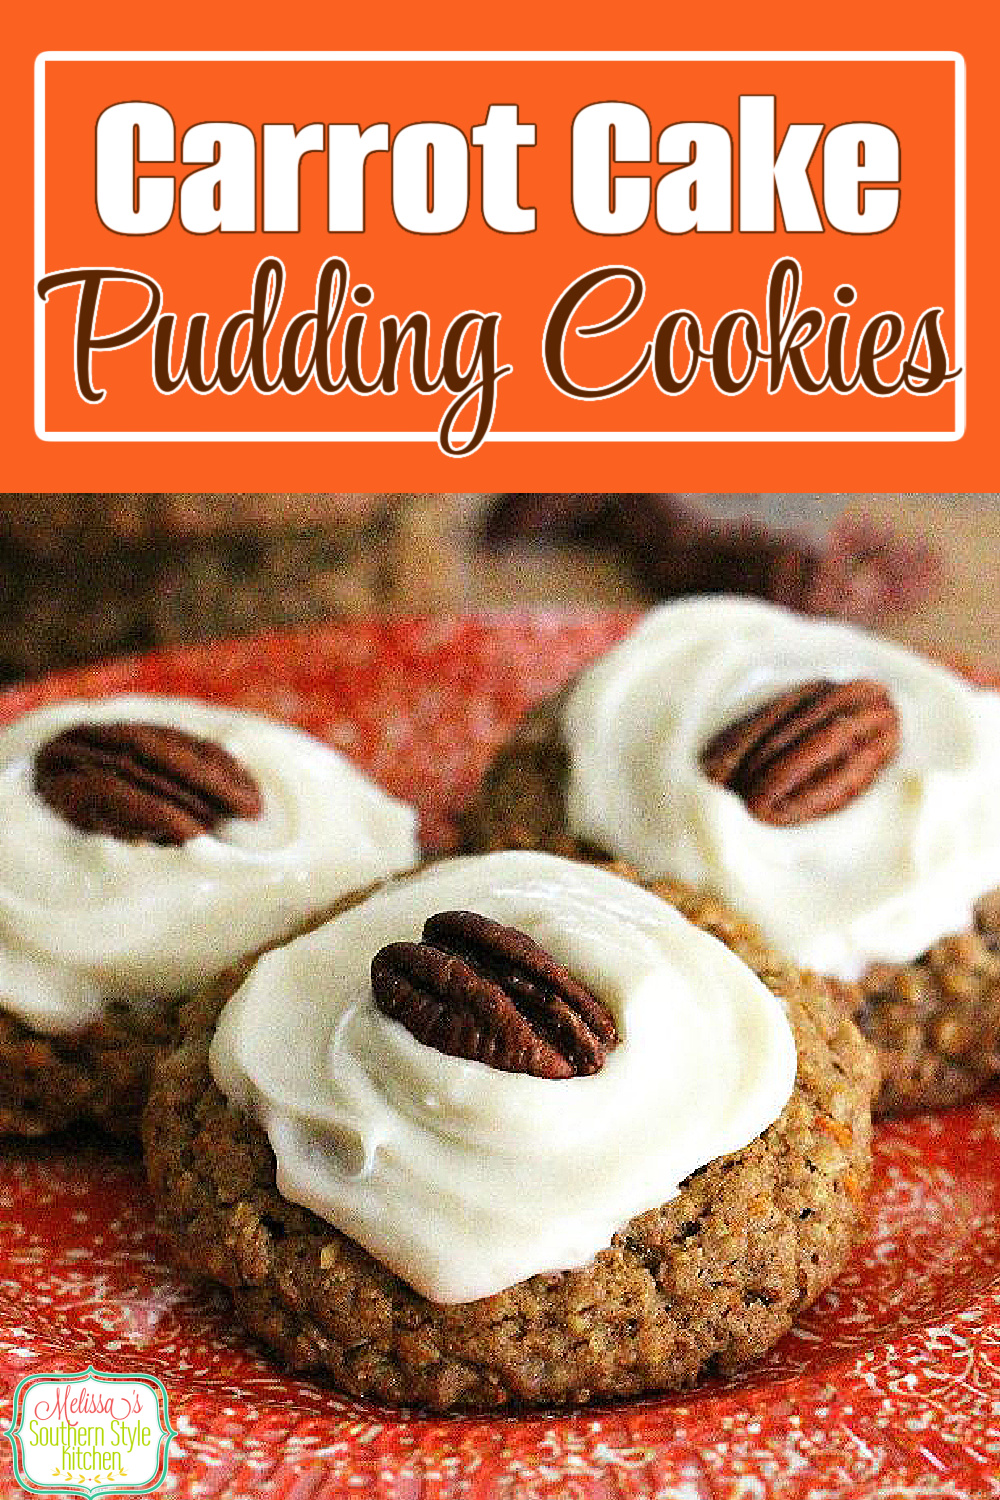 Cream cheese frosted Carrot Cake Pudding Cookies #carrotcake #cookies #puddingcookies #easterdesserts #carrotcakecookies #desserts #dessertfoodrecipes #southernfood #southernrecipes #melissassouthernstylekitchen via @melissasssk